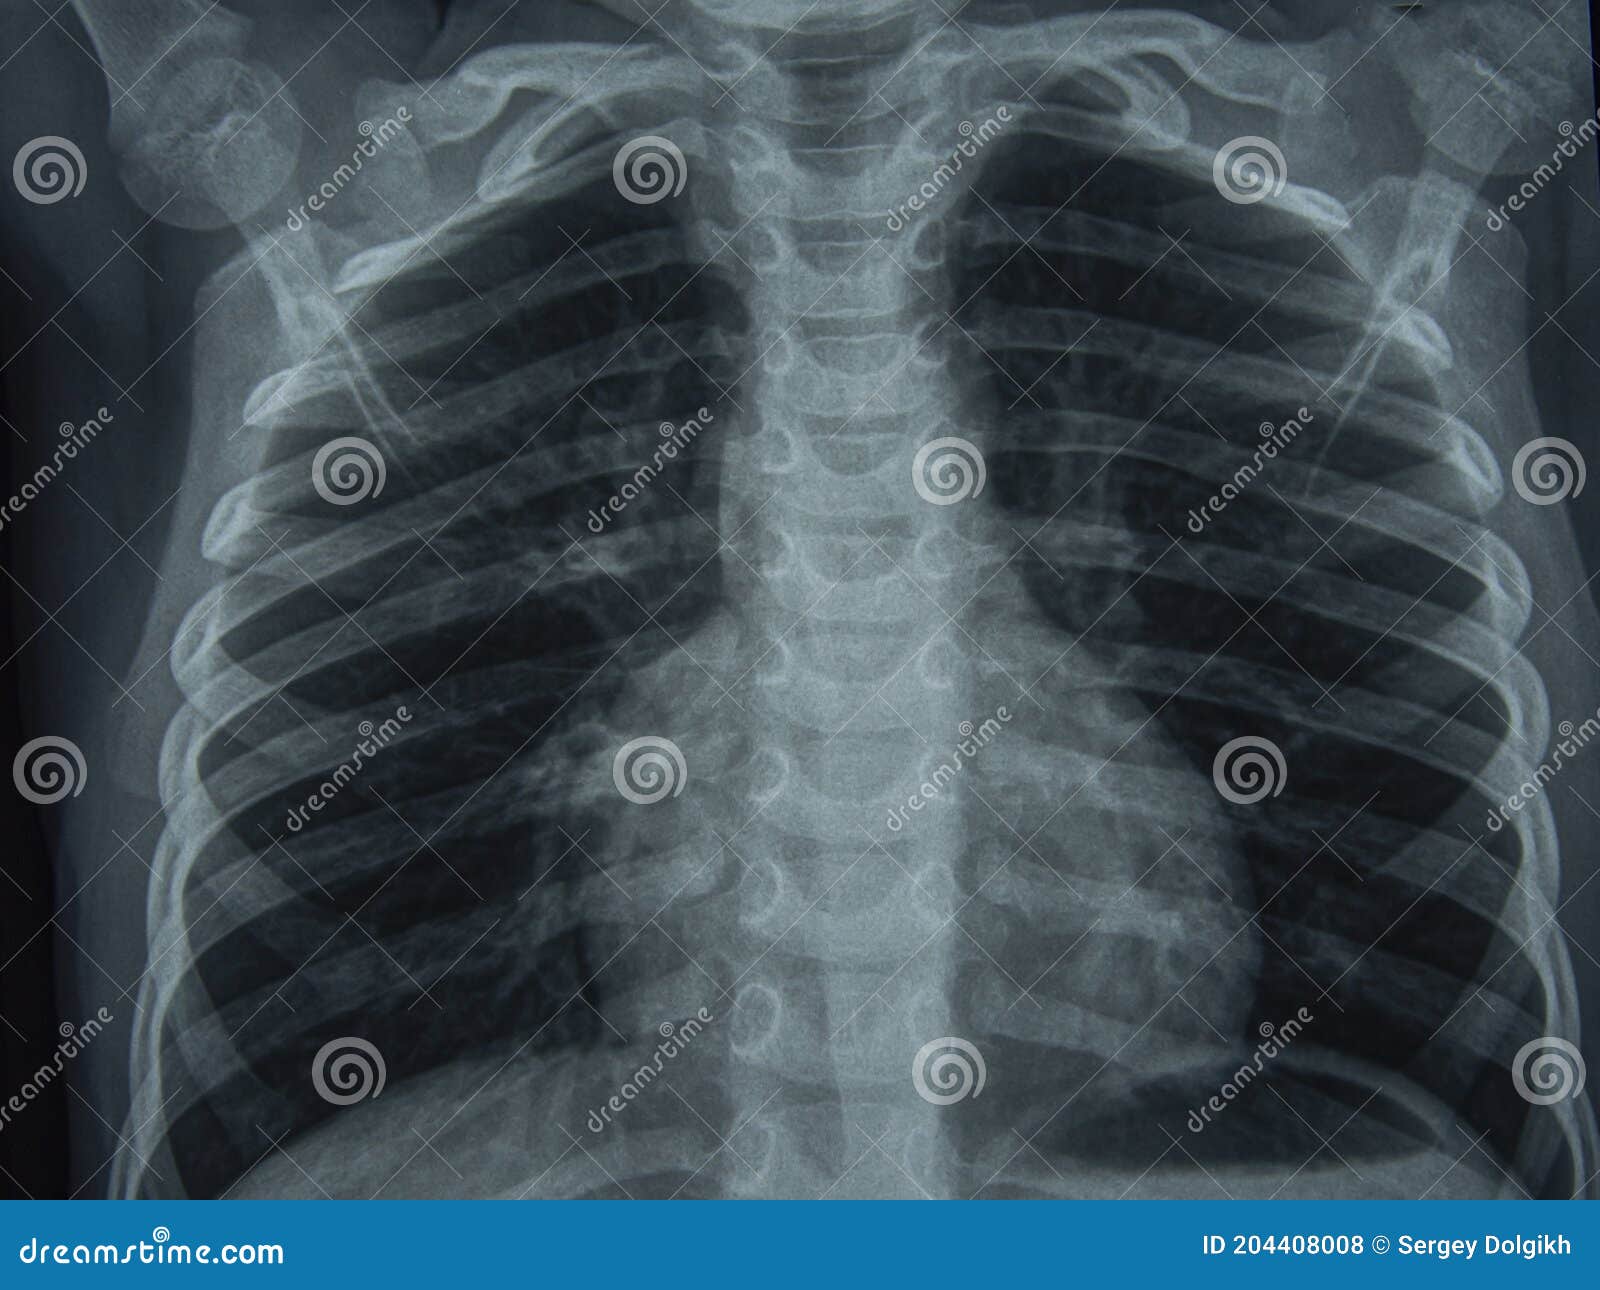 radiographic image or x-ray image of human chest for a medical diagnosis . check up concept